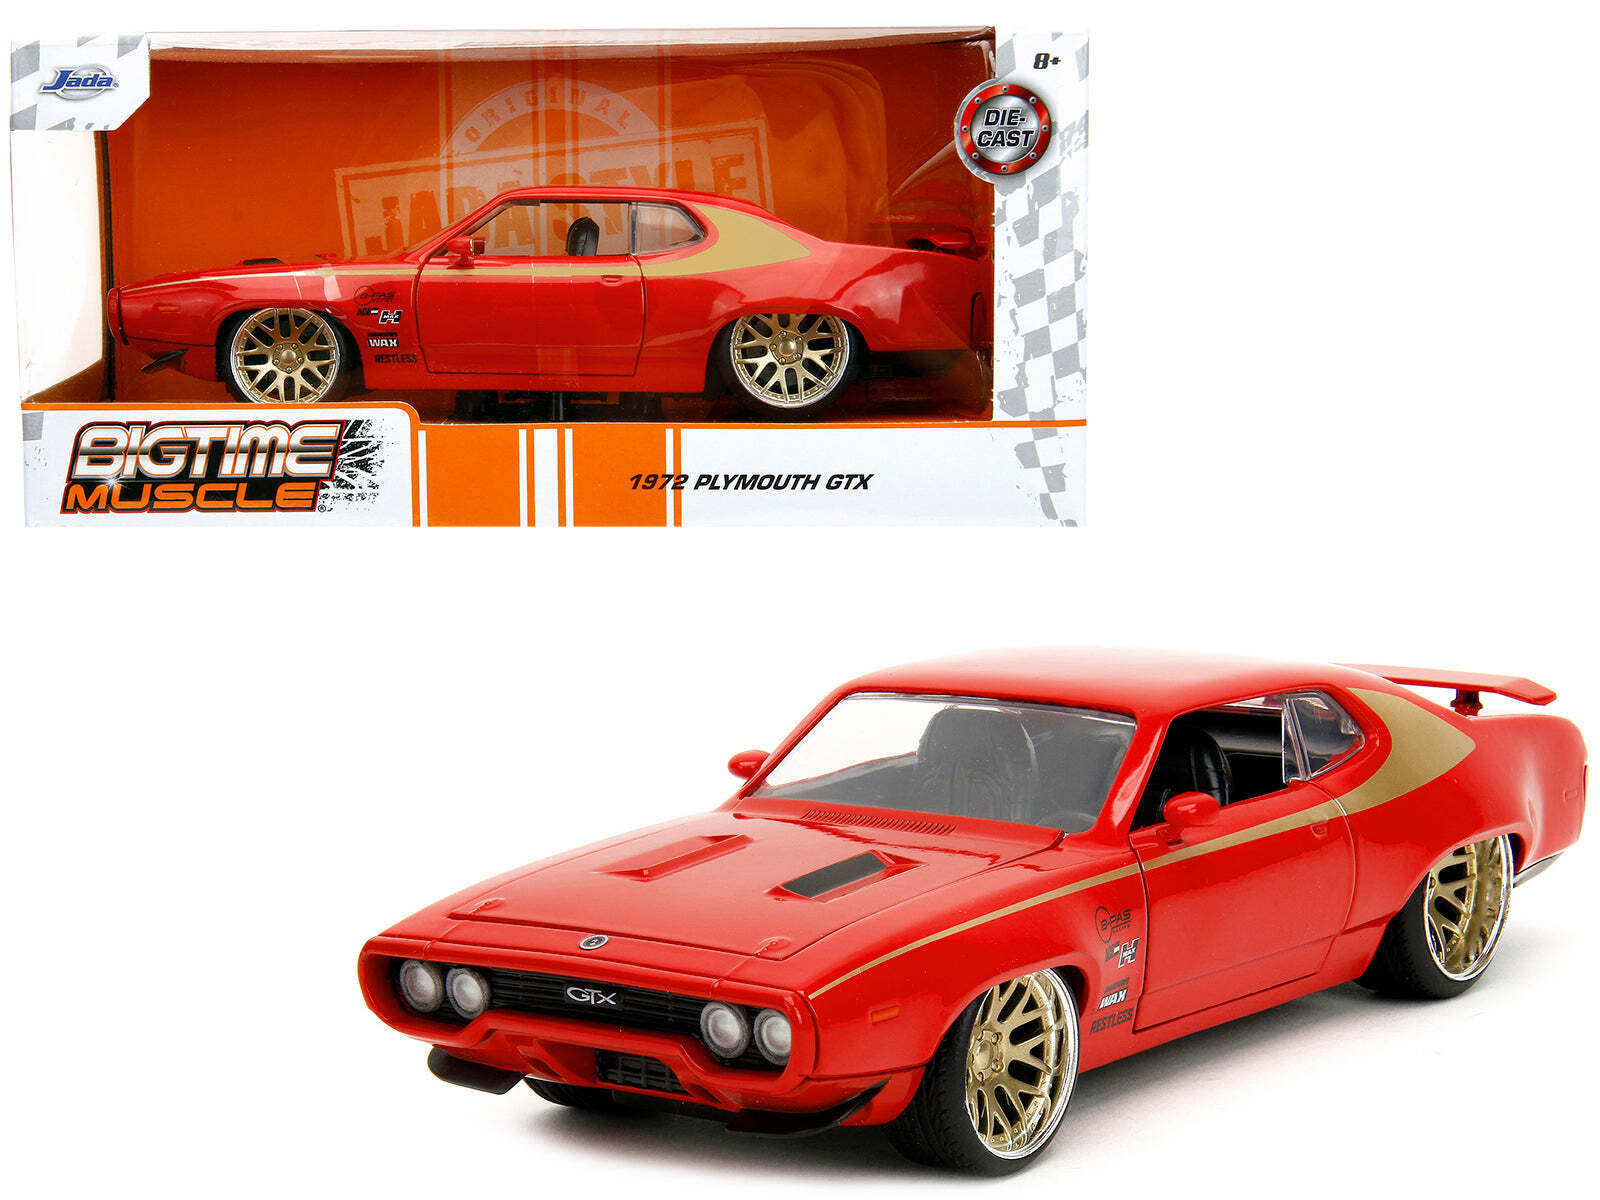 1972 Plymouth GTX with Graphics Bigtime Muscle Series 1/24 Diecast Model Car